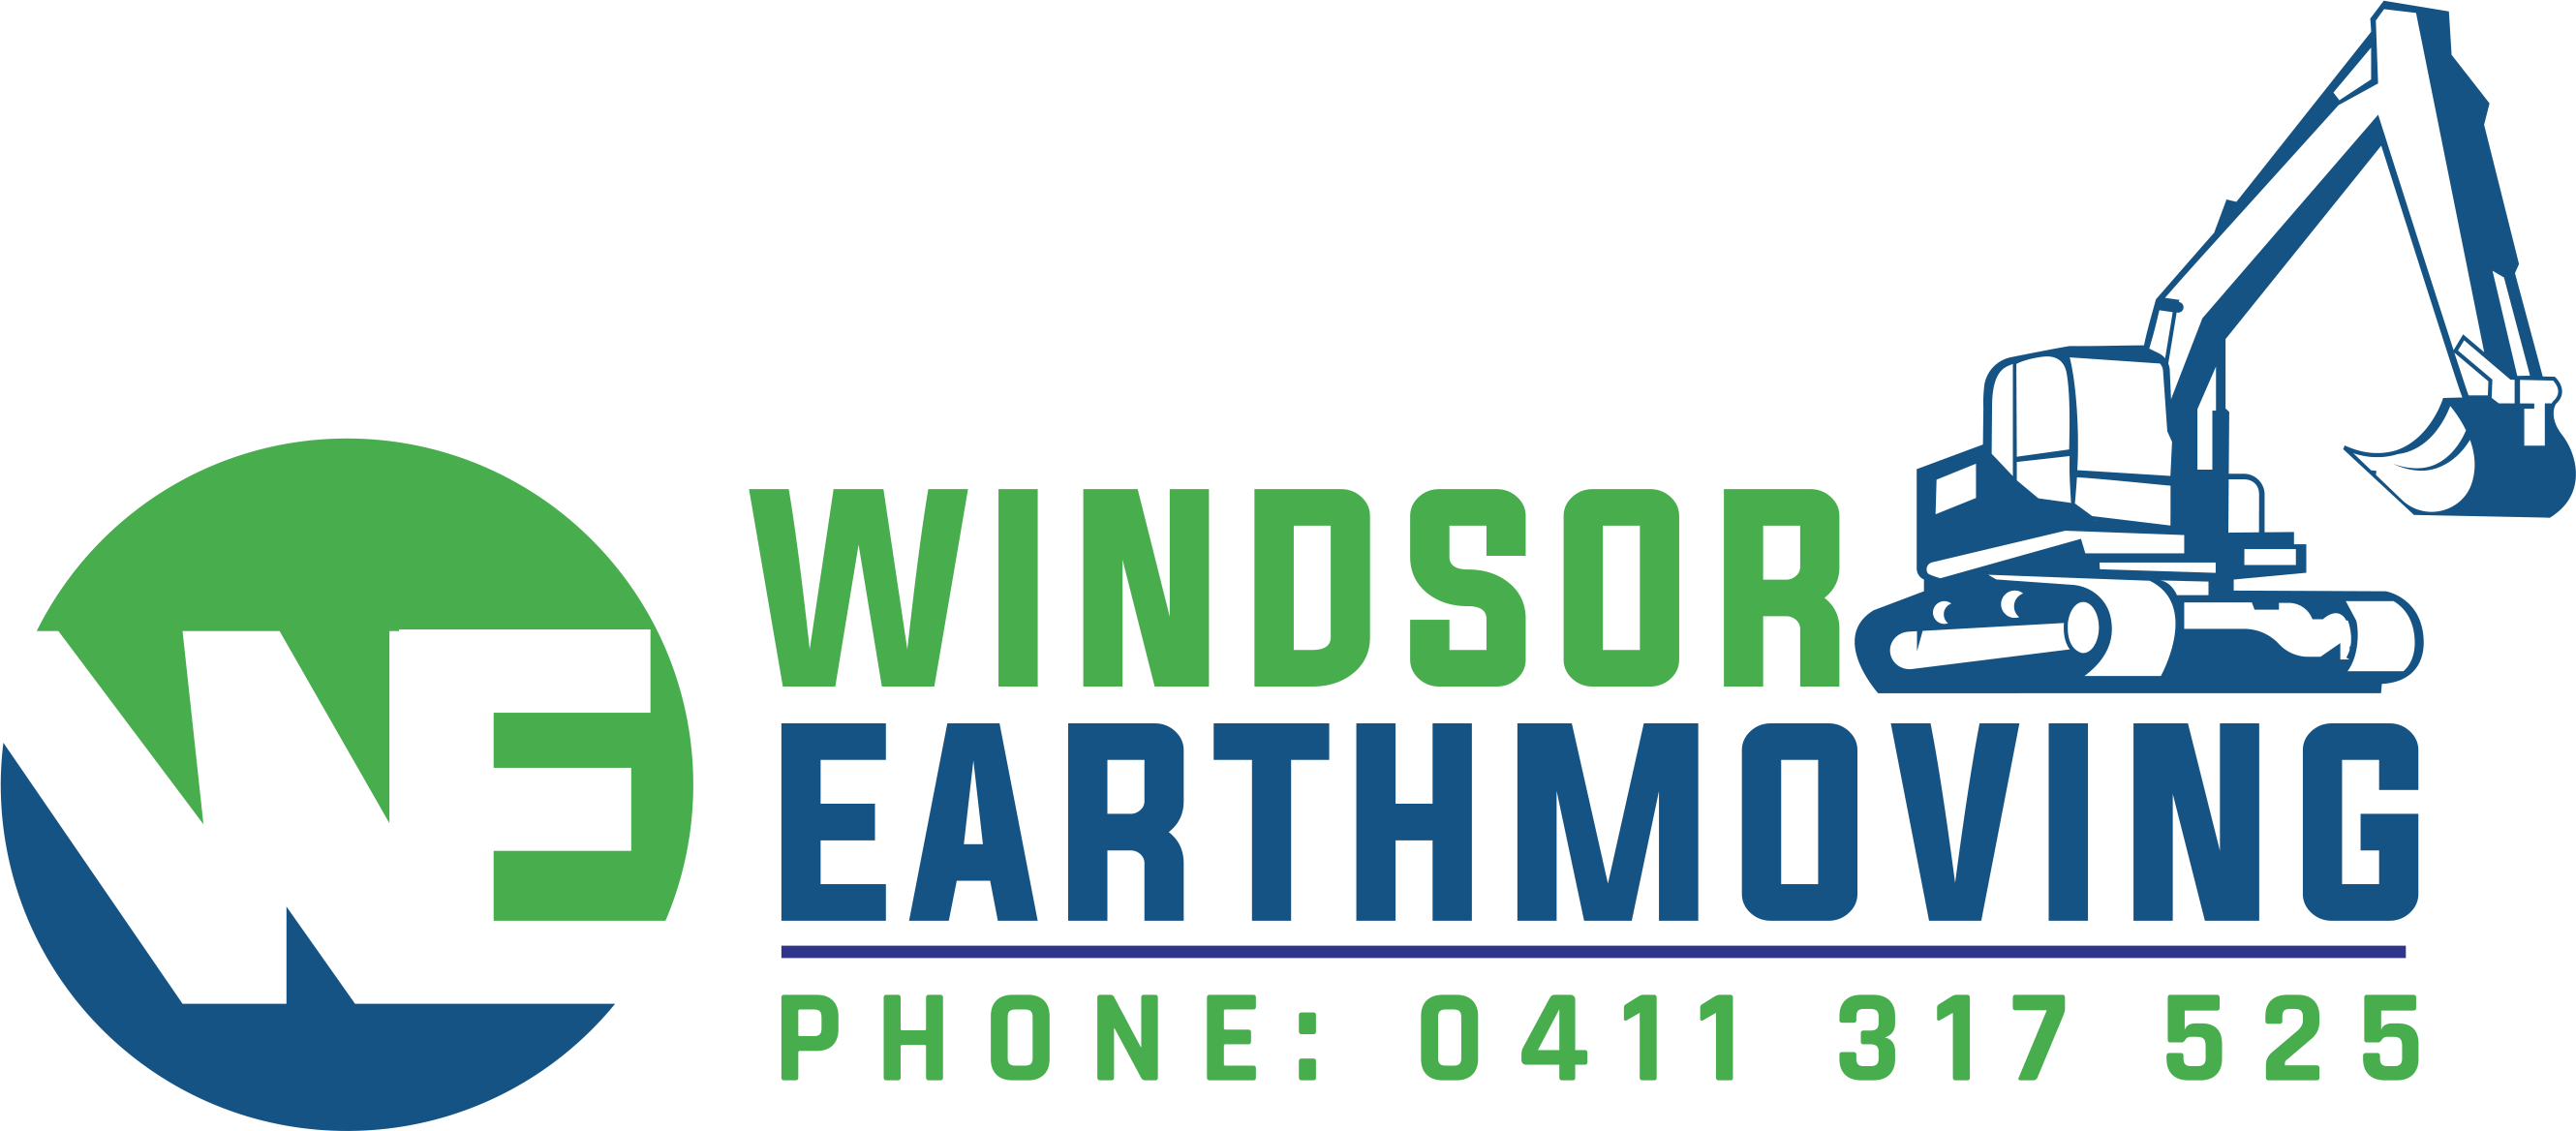 Windsor Earth Moving